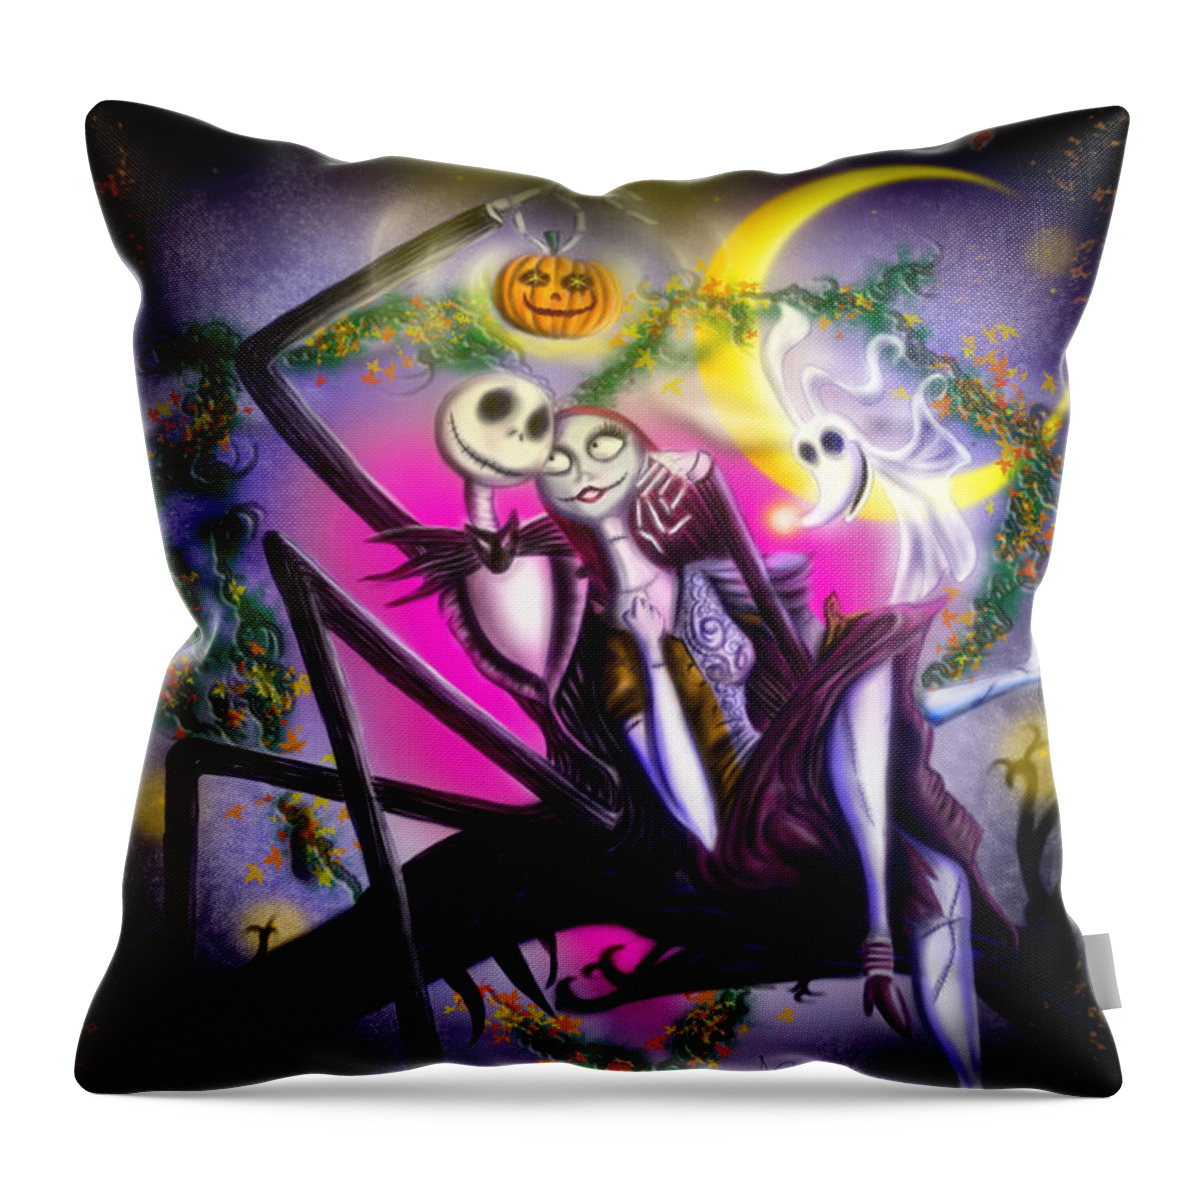 Greeting Card Throw Pillow featuring the digital art Happy Halloween II by Alessandro Della Pietra